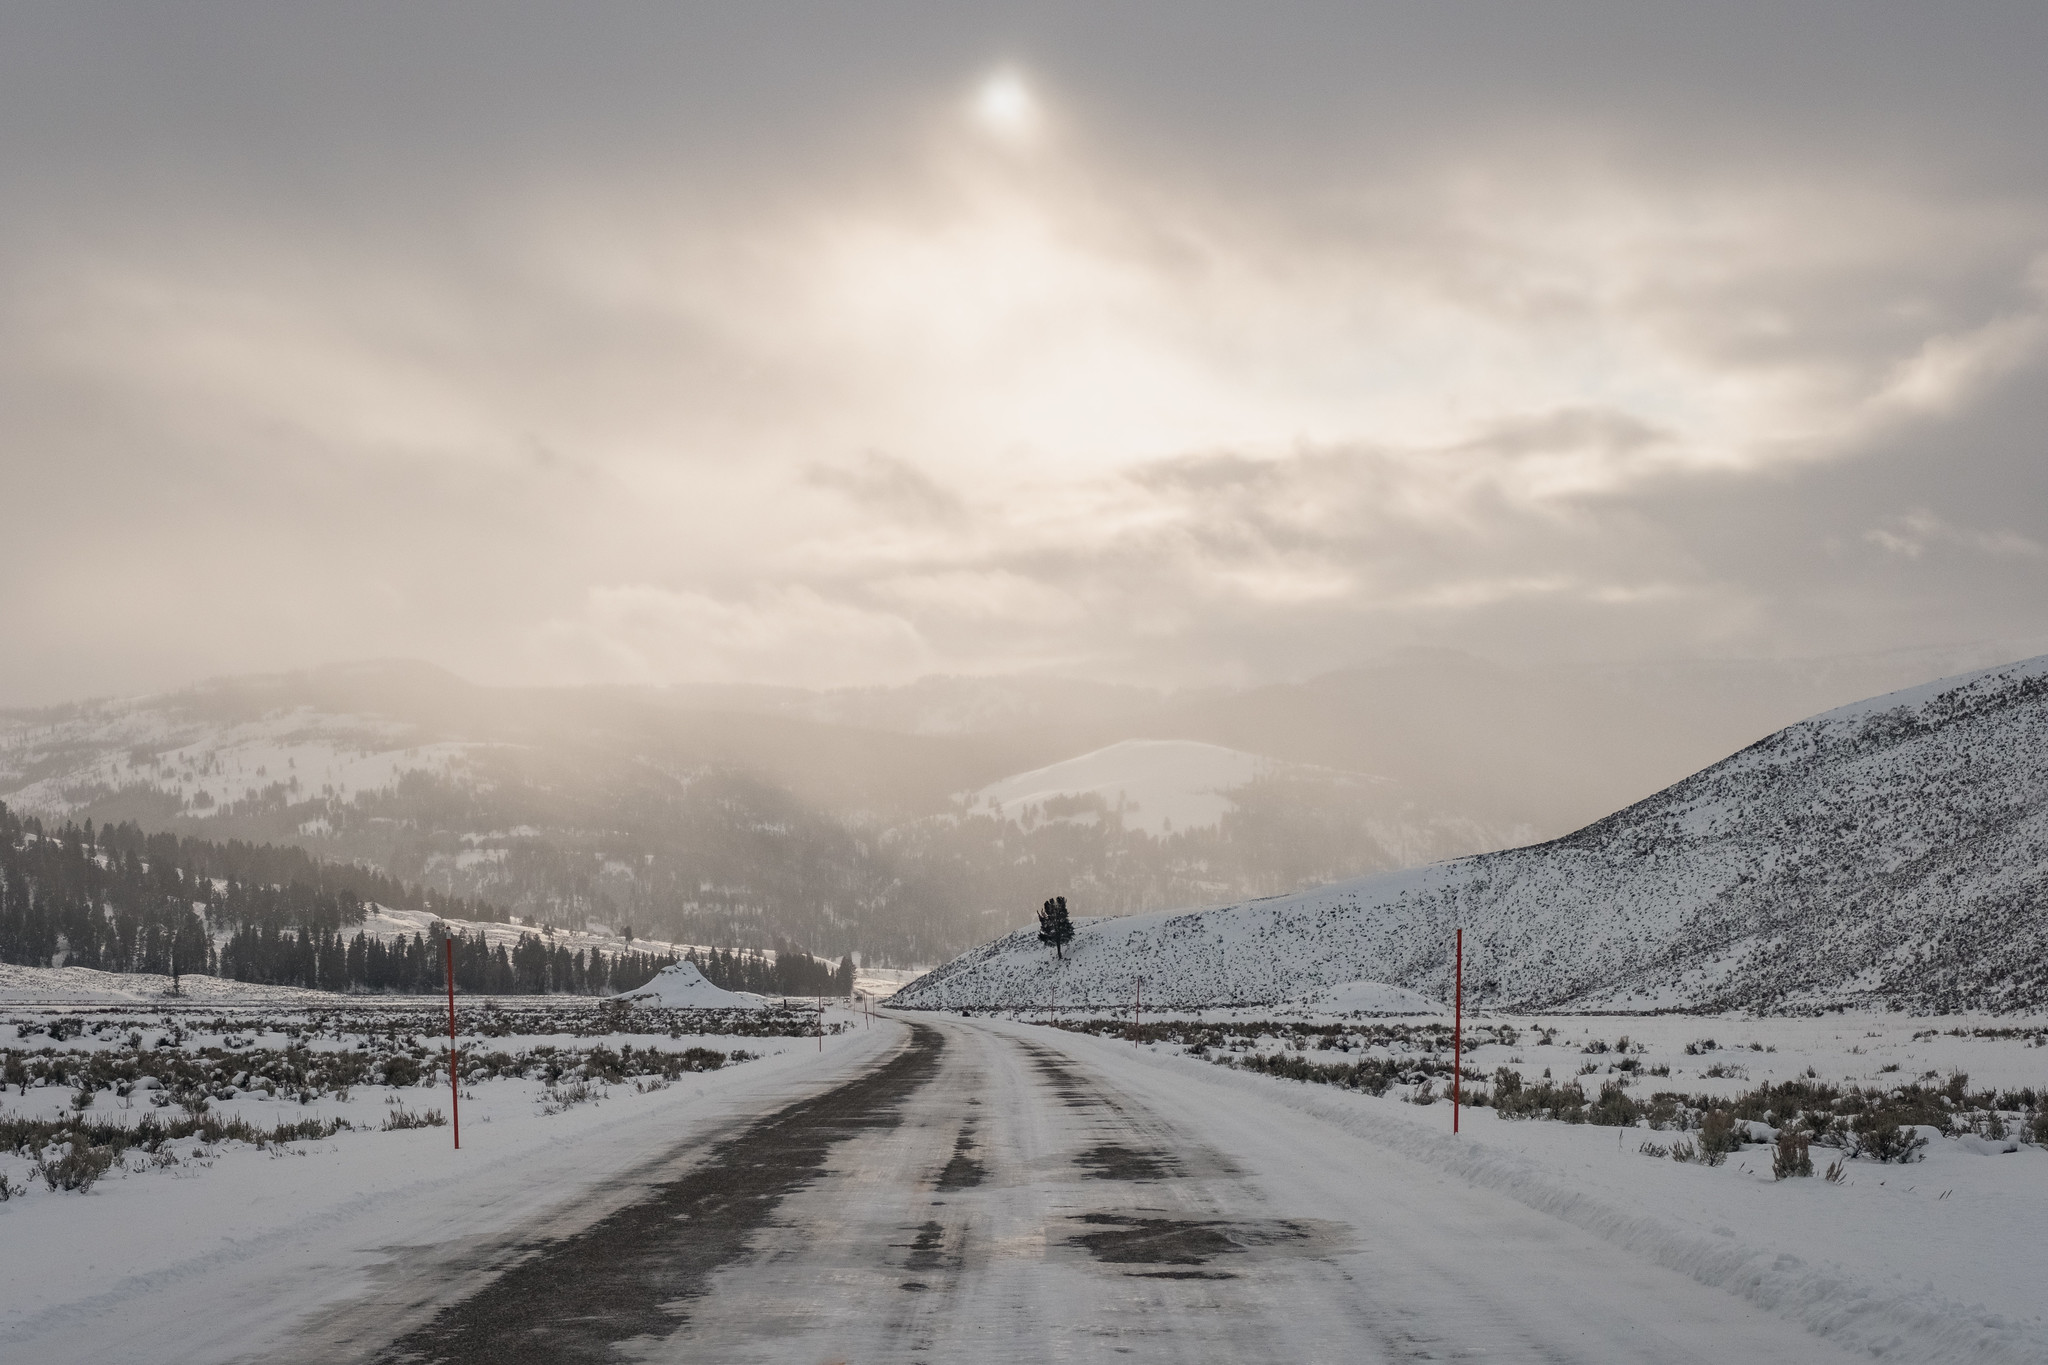 A snow- and ice-covered road in a mountainous landscape. Sunlight filters through the clouds.